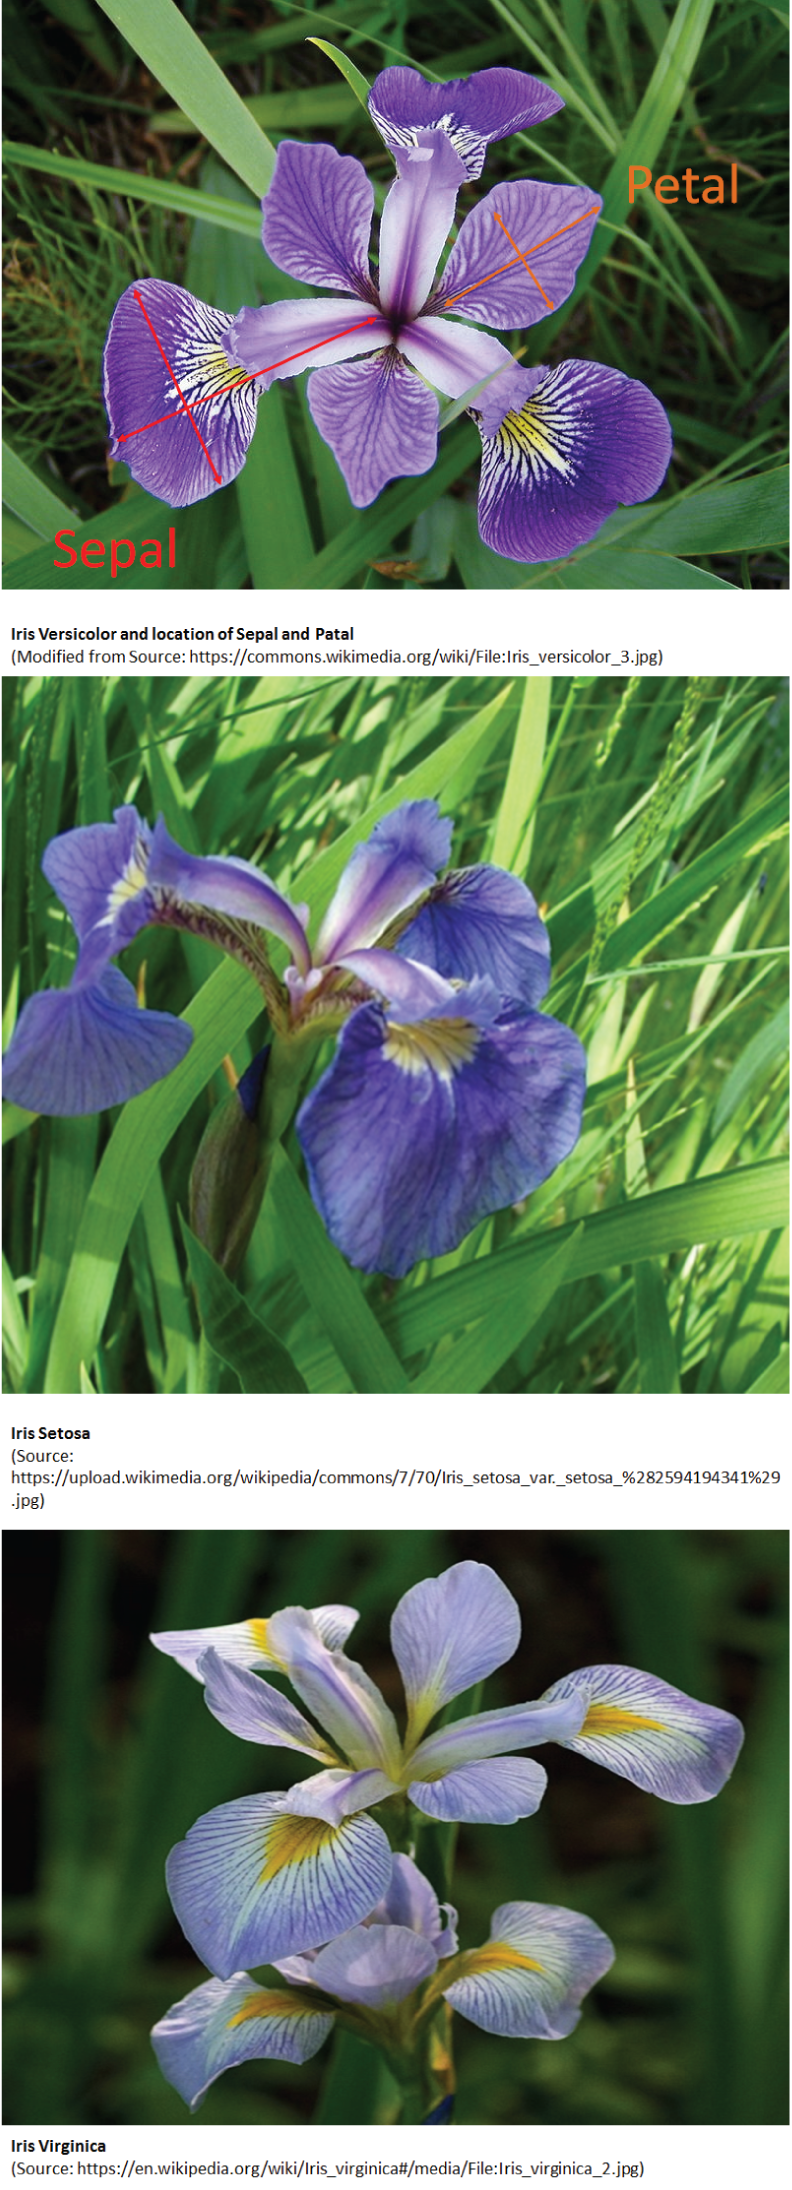 Snapshot of example of three different types of Iris flowers, Versicolor (top), Setosa (middle), and Virginica (bottom), as well as the location of the sepal and petal